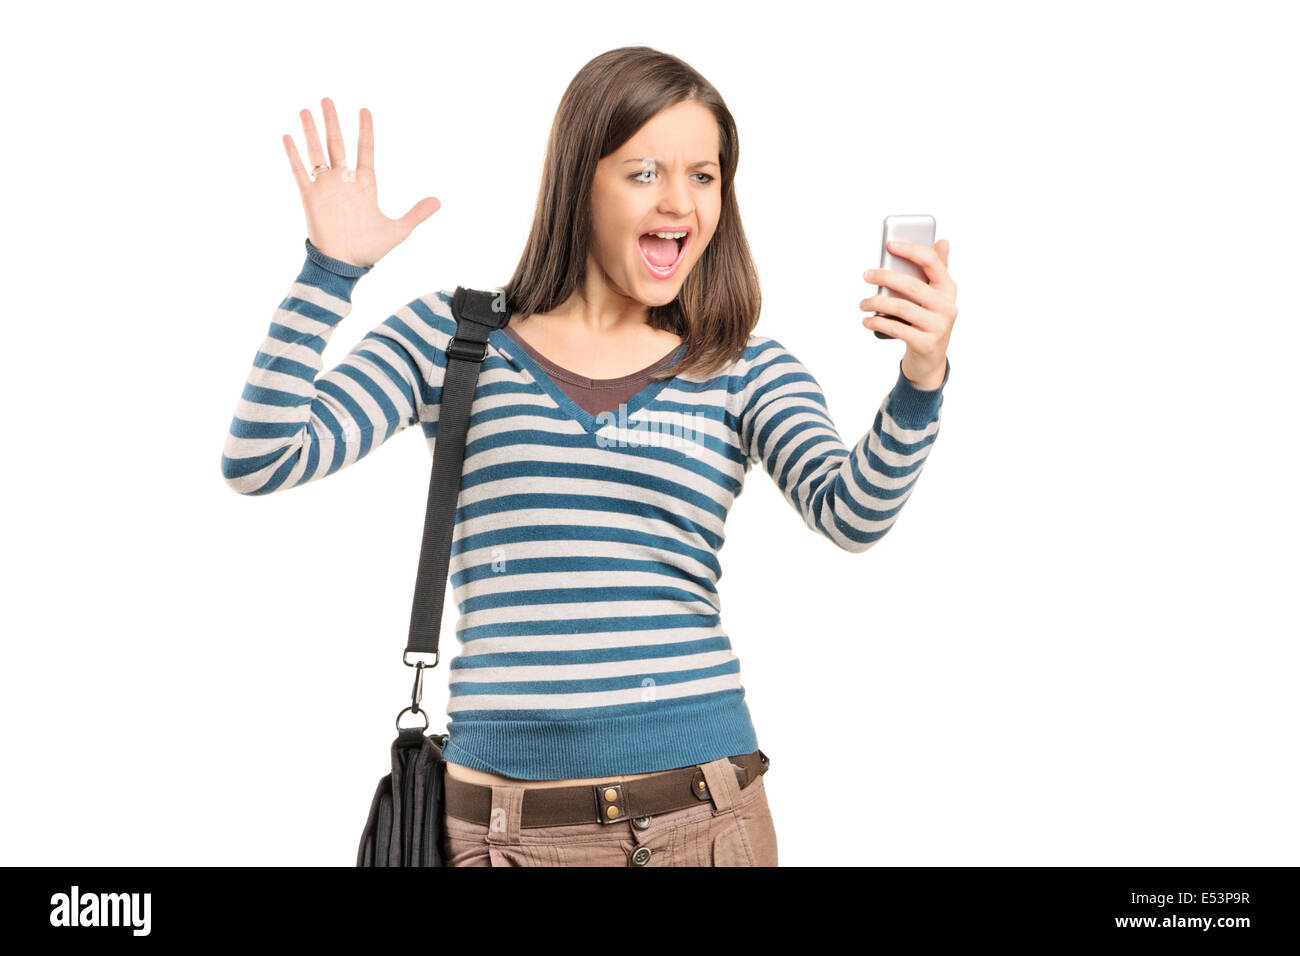 Angry girl looking at a cell phone Banque D'Images